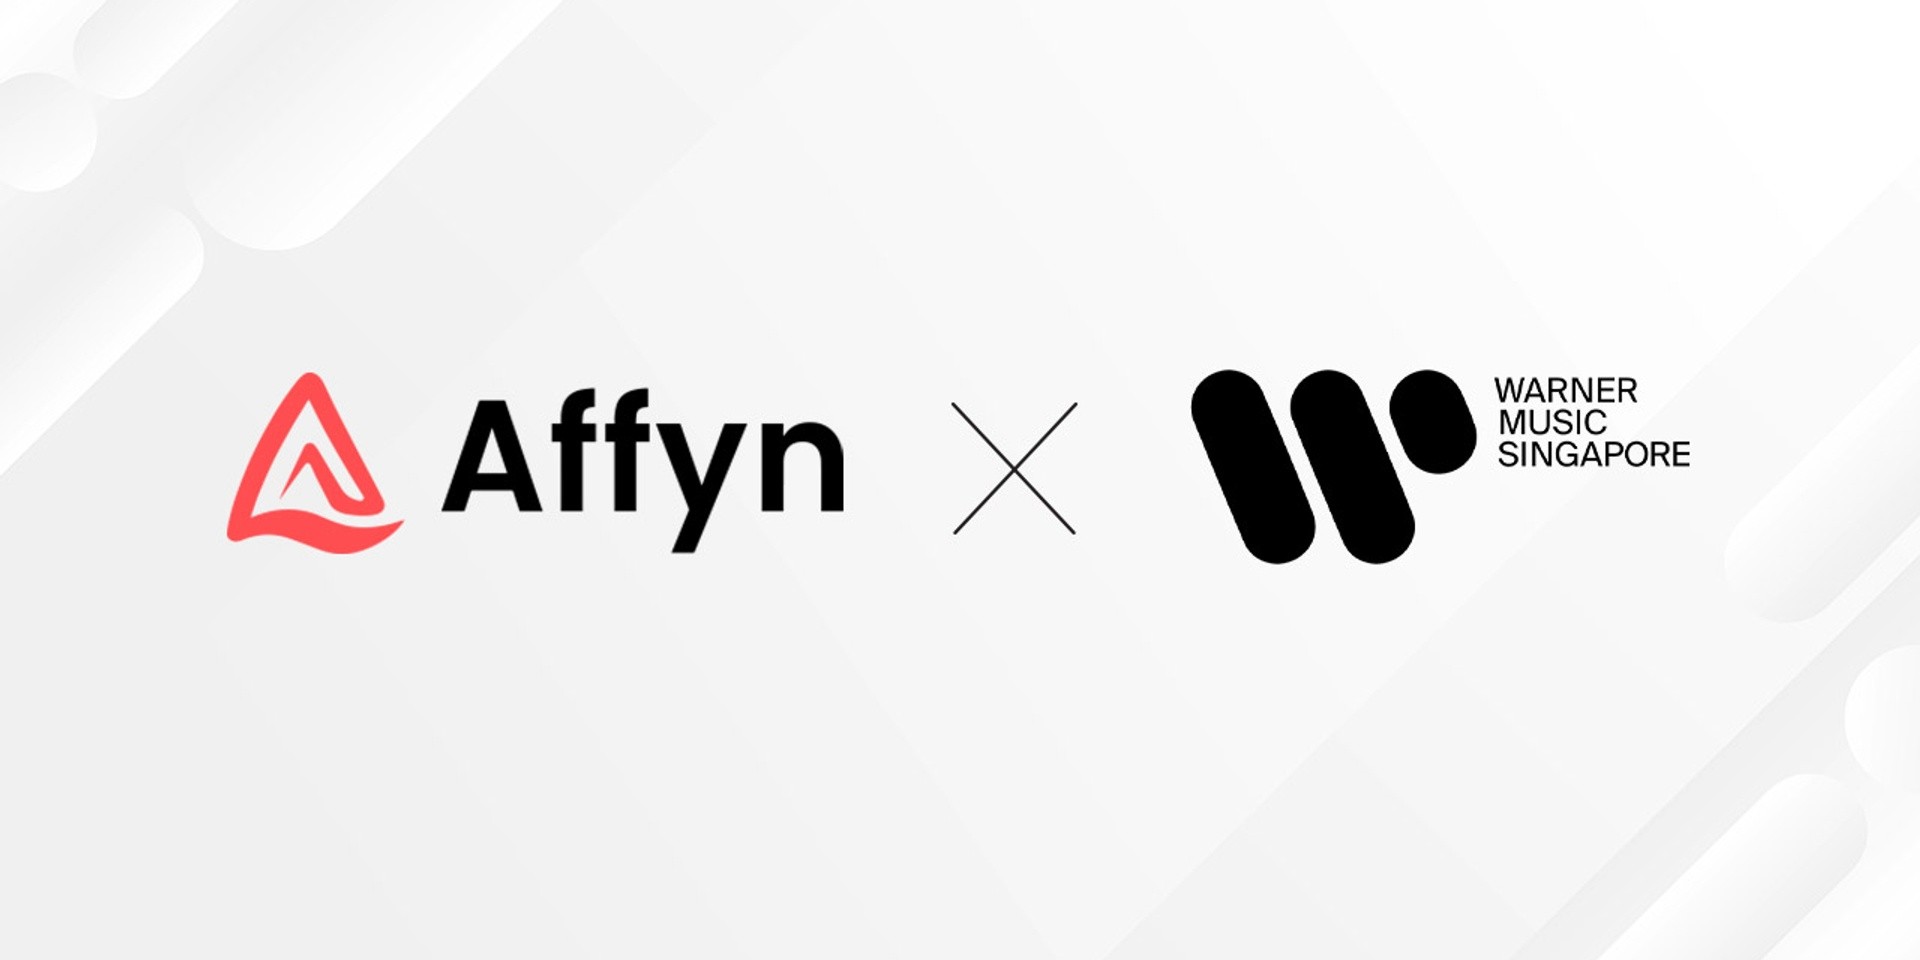 Warner Music Singapore partners with Affyn to release new Web3 game